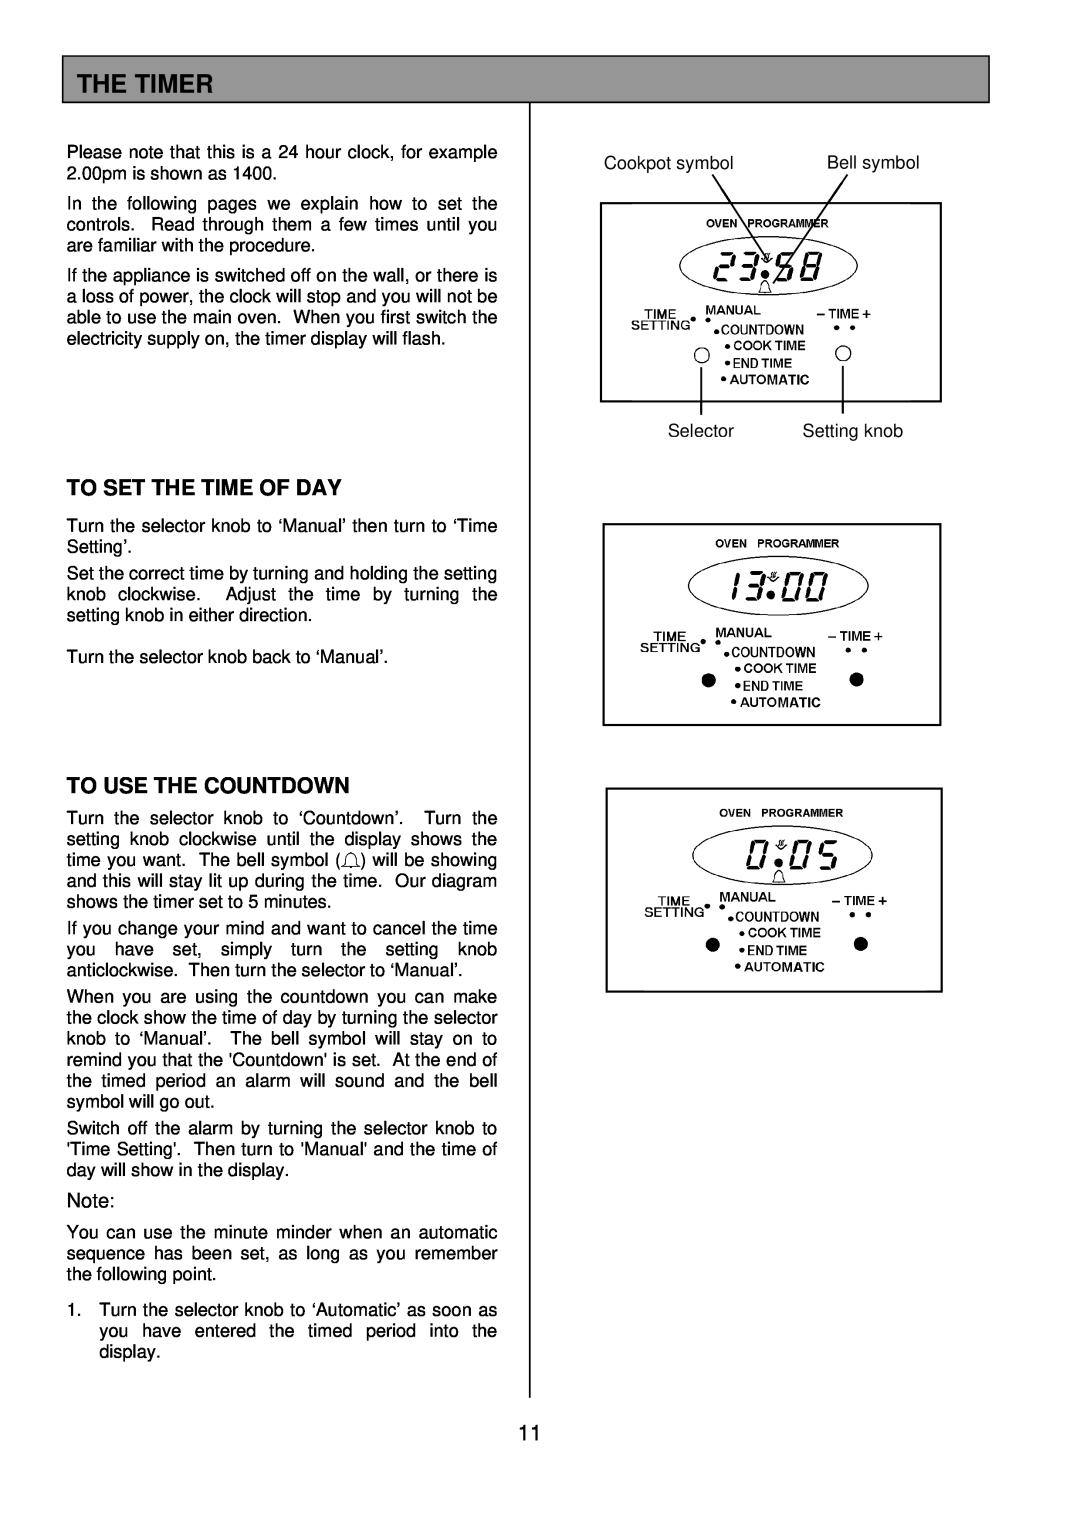 Tricity Bendix SB462 installation instructions The Timer, To Set The Time Of Day, To Use The Countdown 